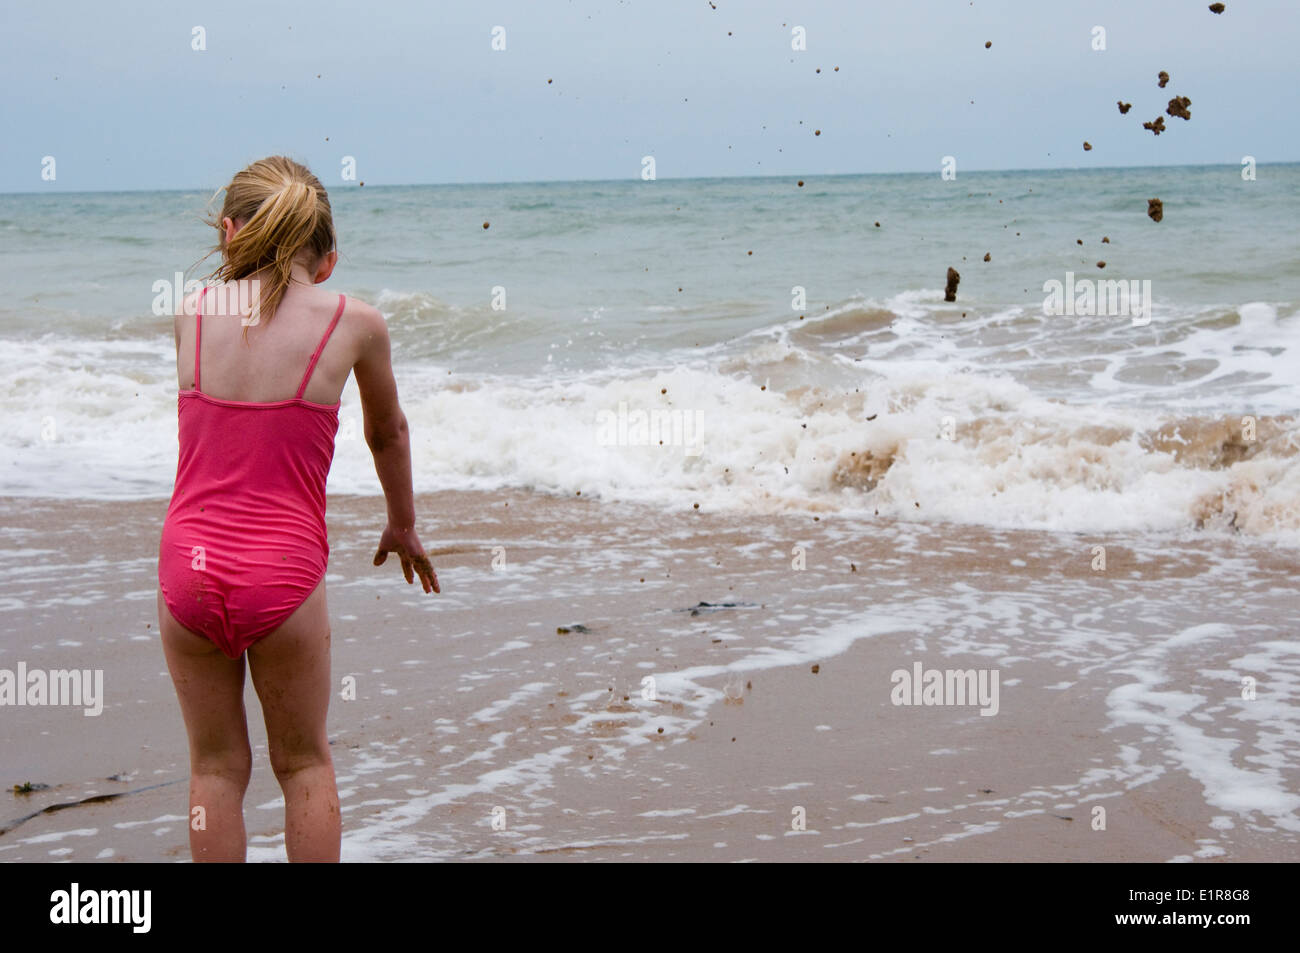 young girl throwing sand into the sea Stock Photo